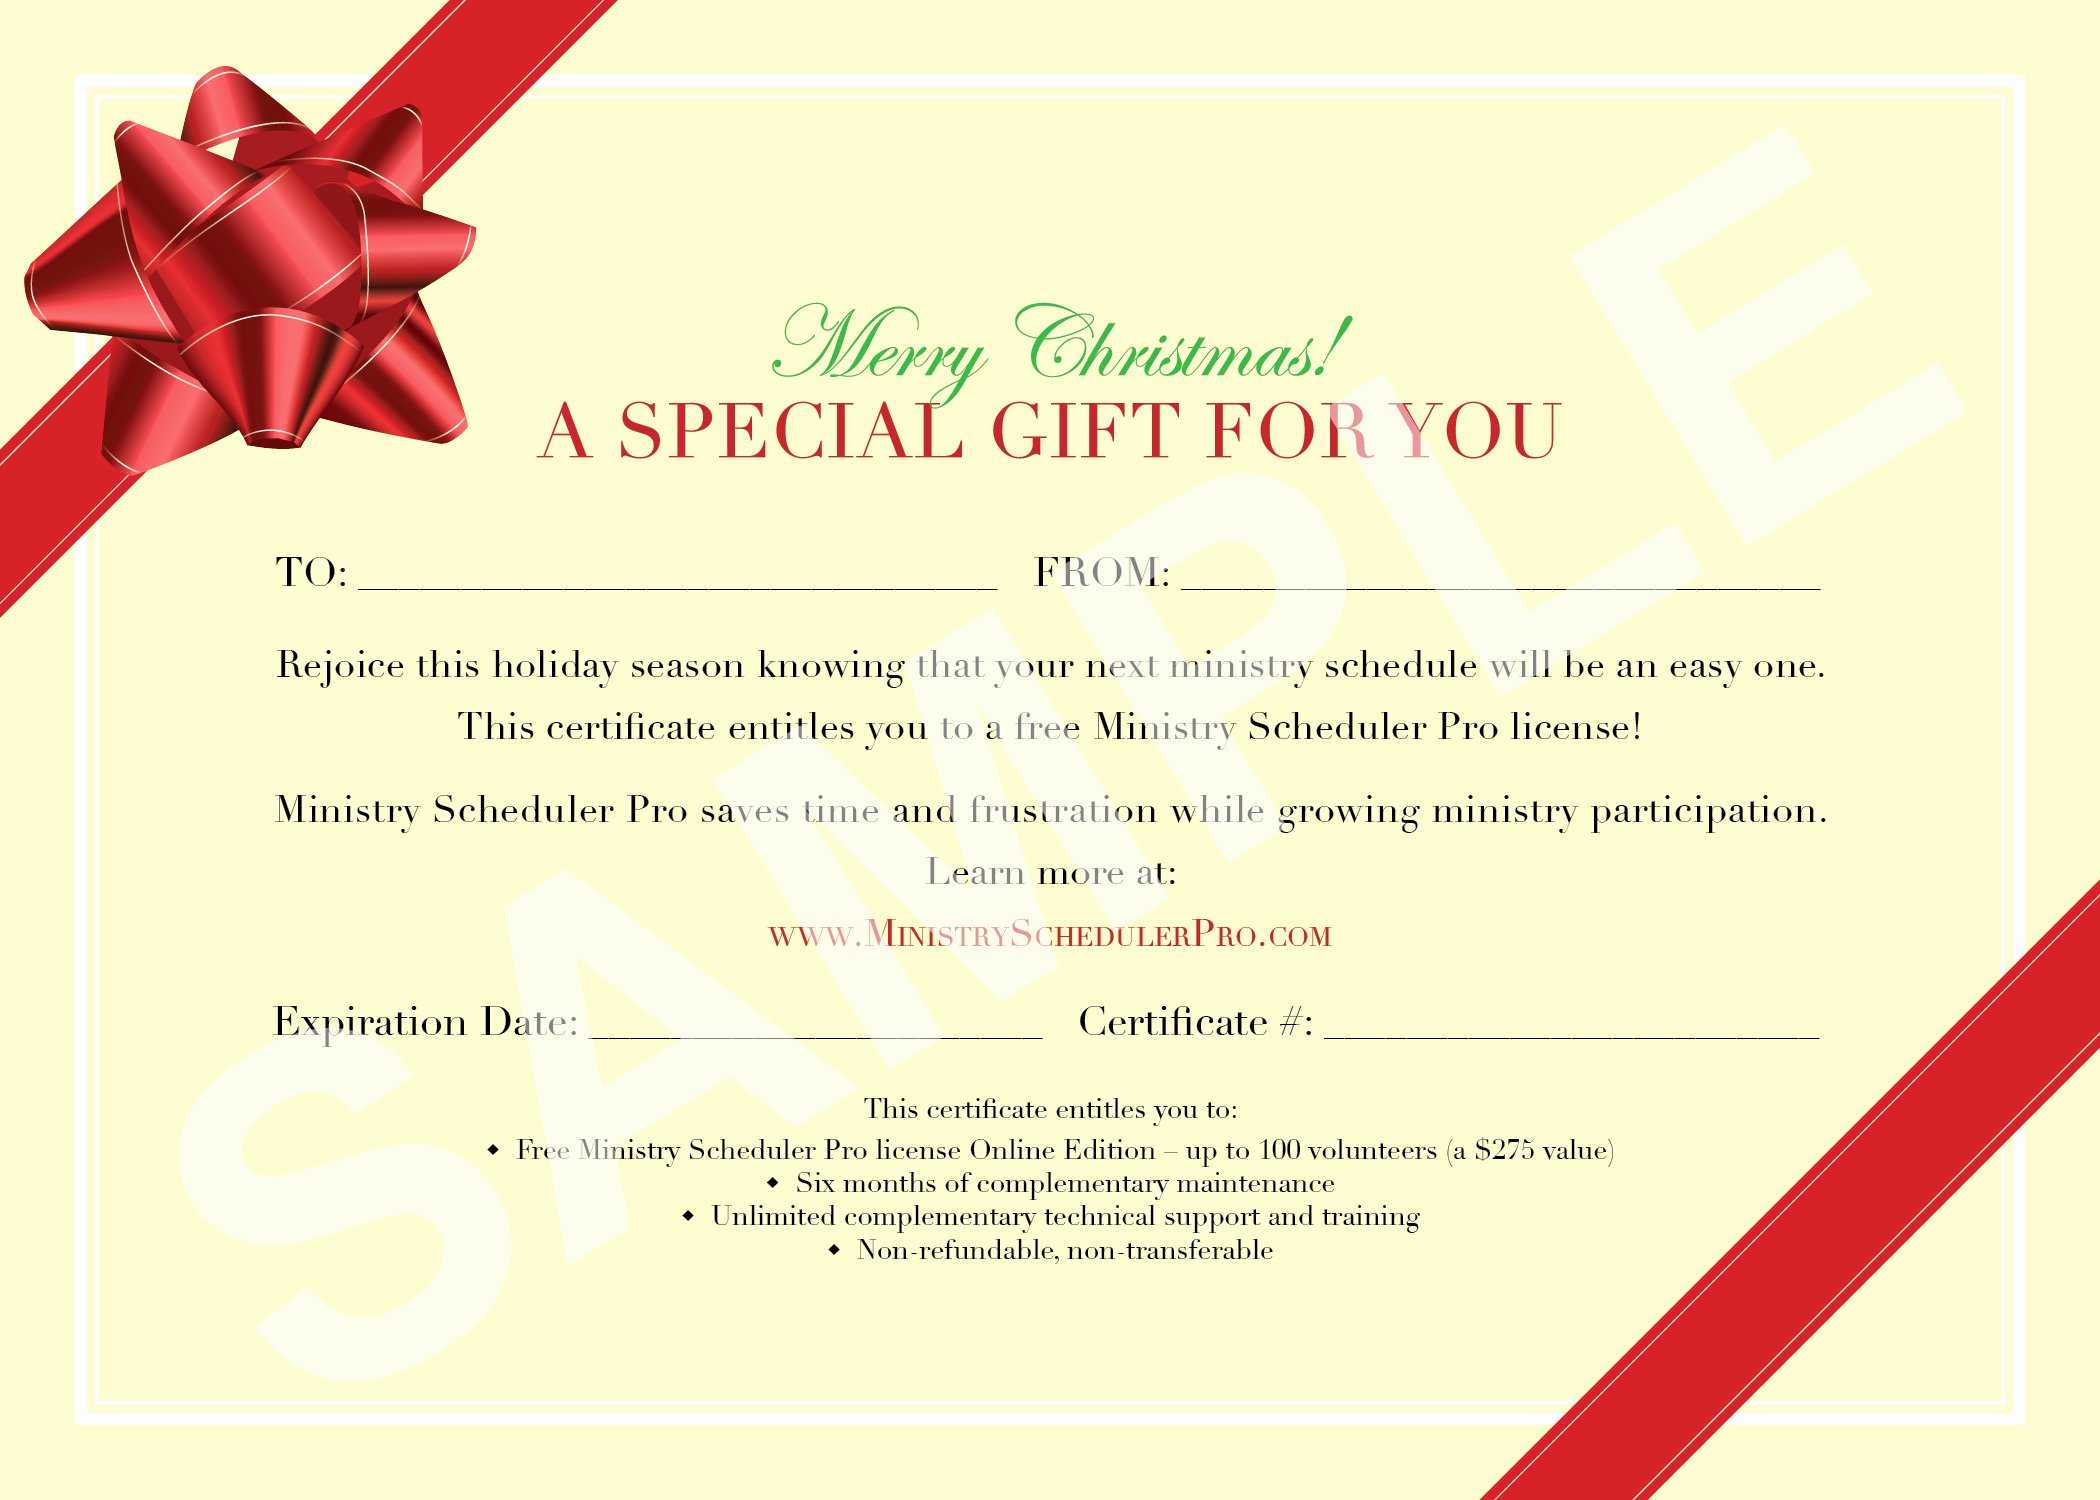 This Certificate Entitles You To Template – Barati.ald2014 Pertaining To Merry Christmas Gift Certificate Templates